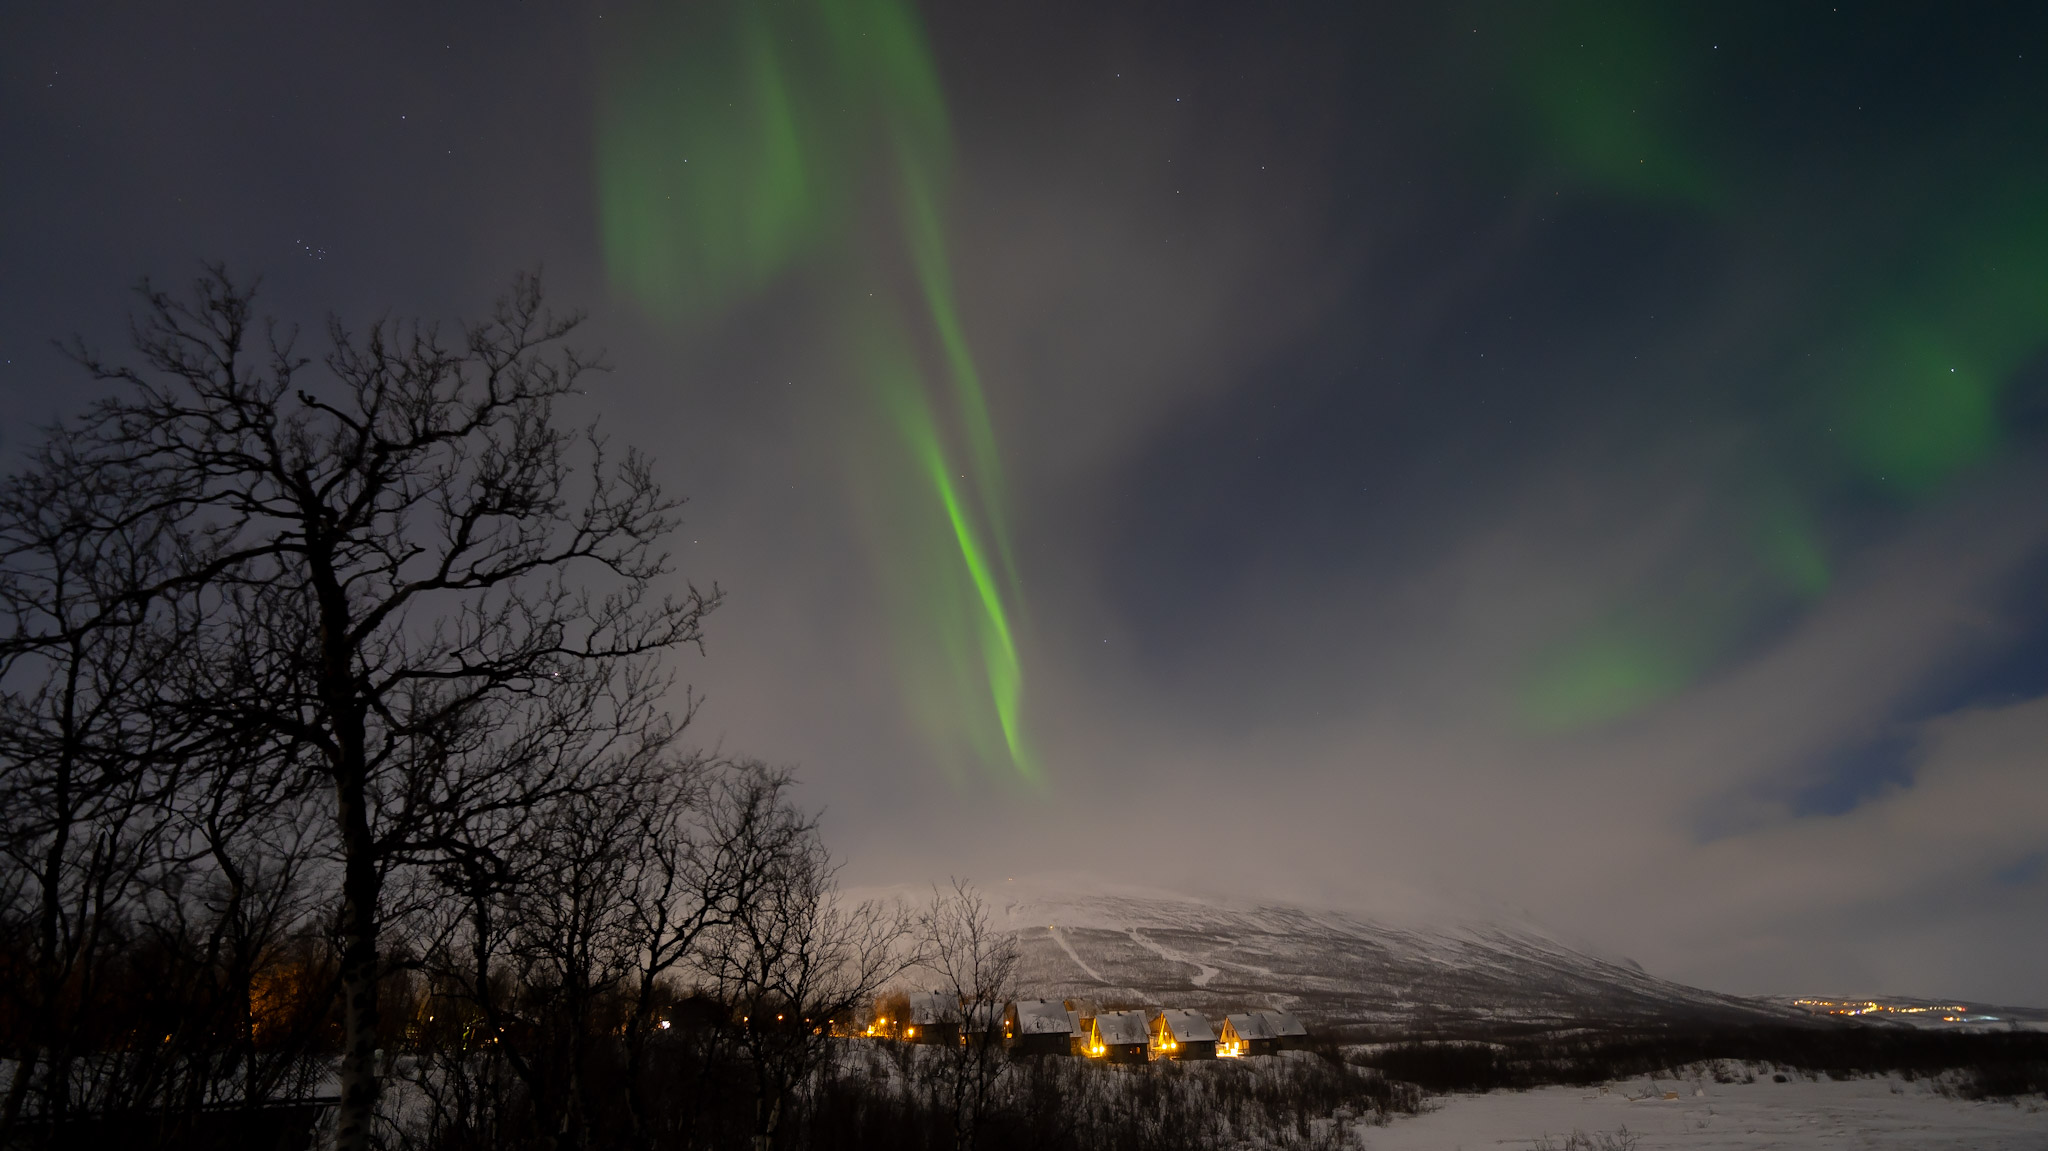 I put Abisko's 'cloud-busting weapon' to the test during a Sweden northern lights adventure and was not disappointed